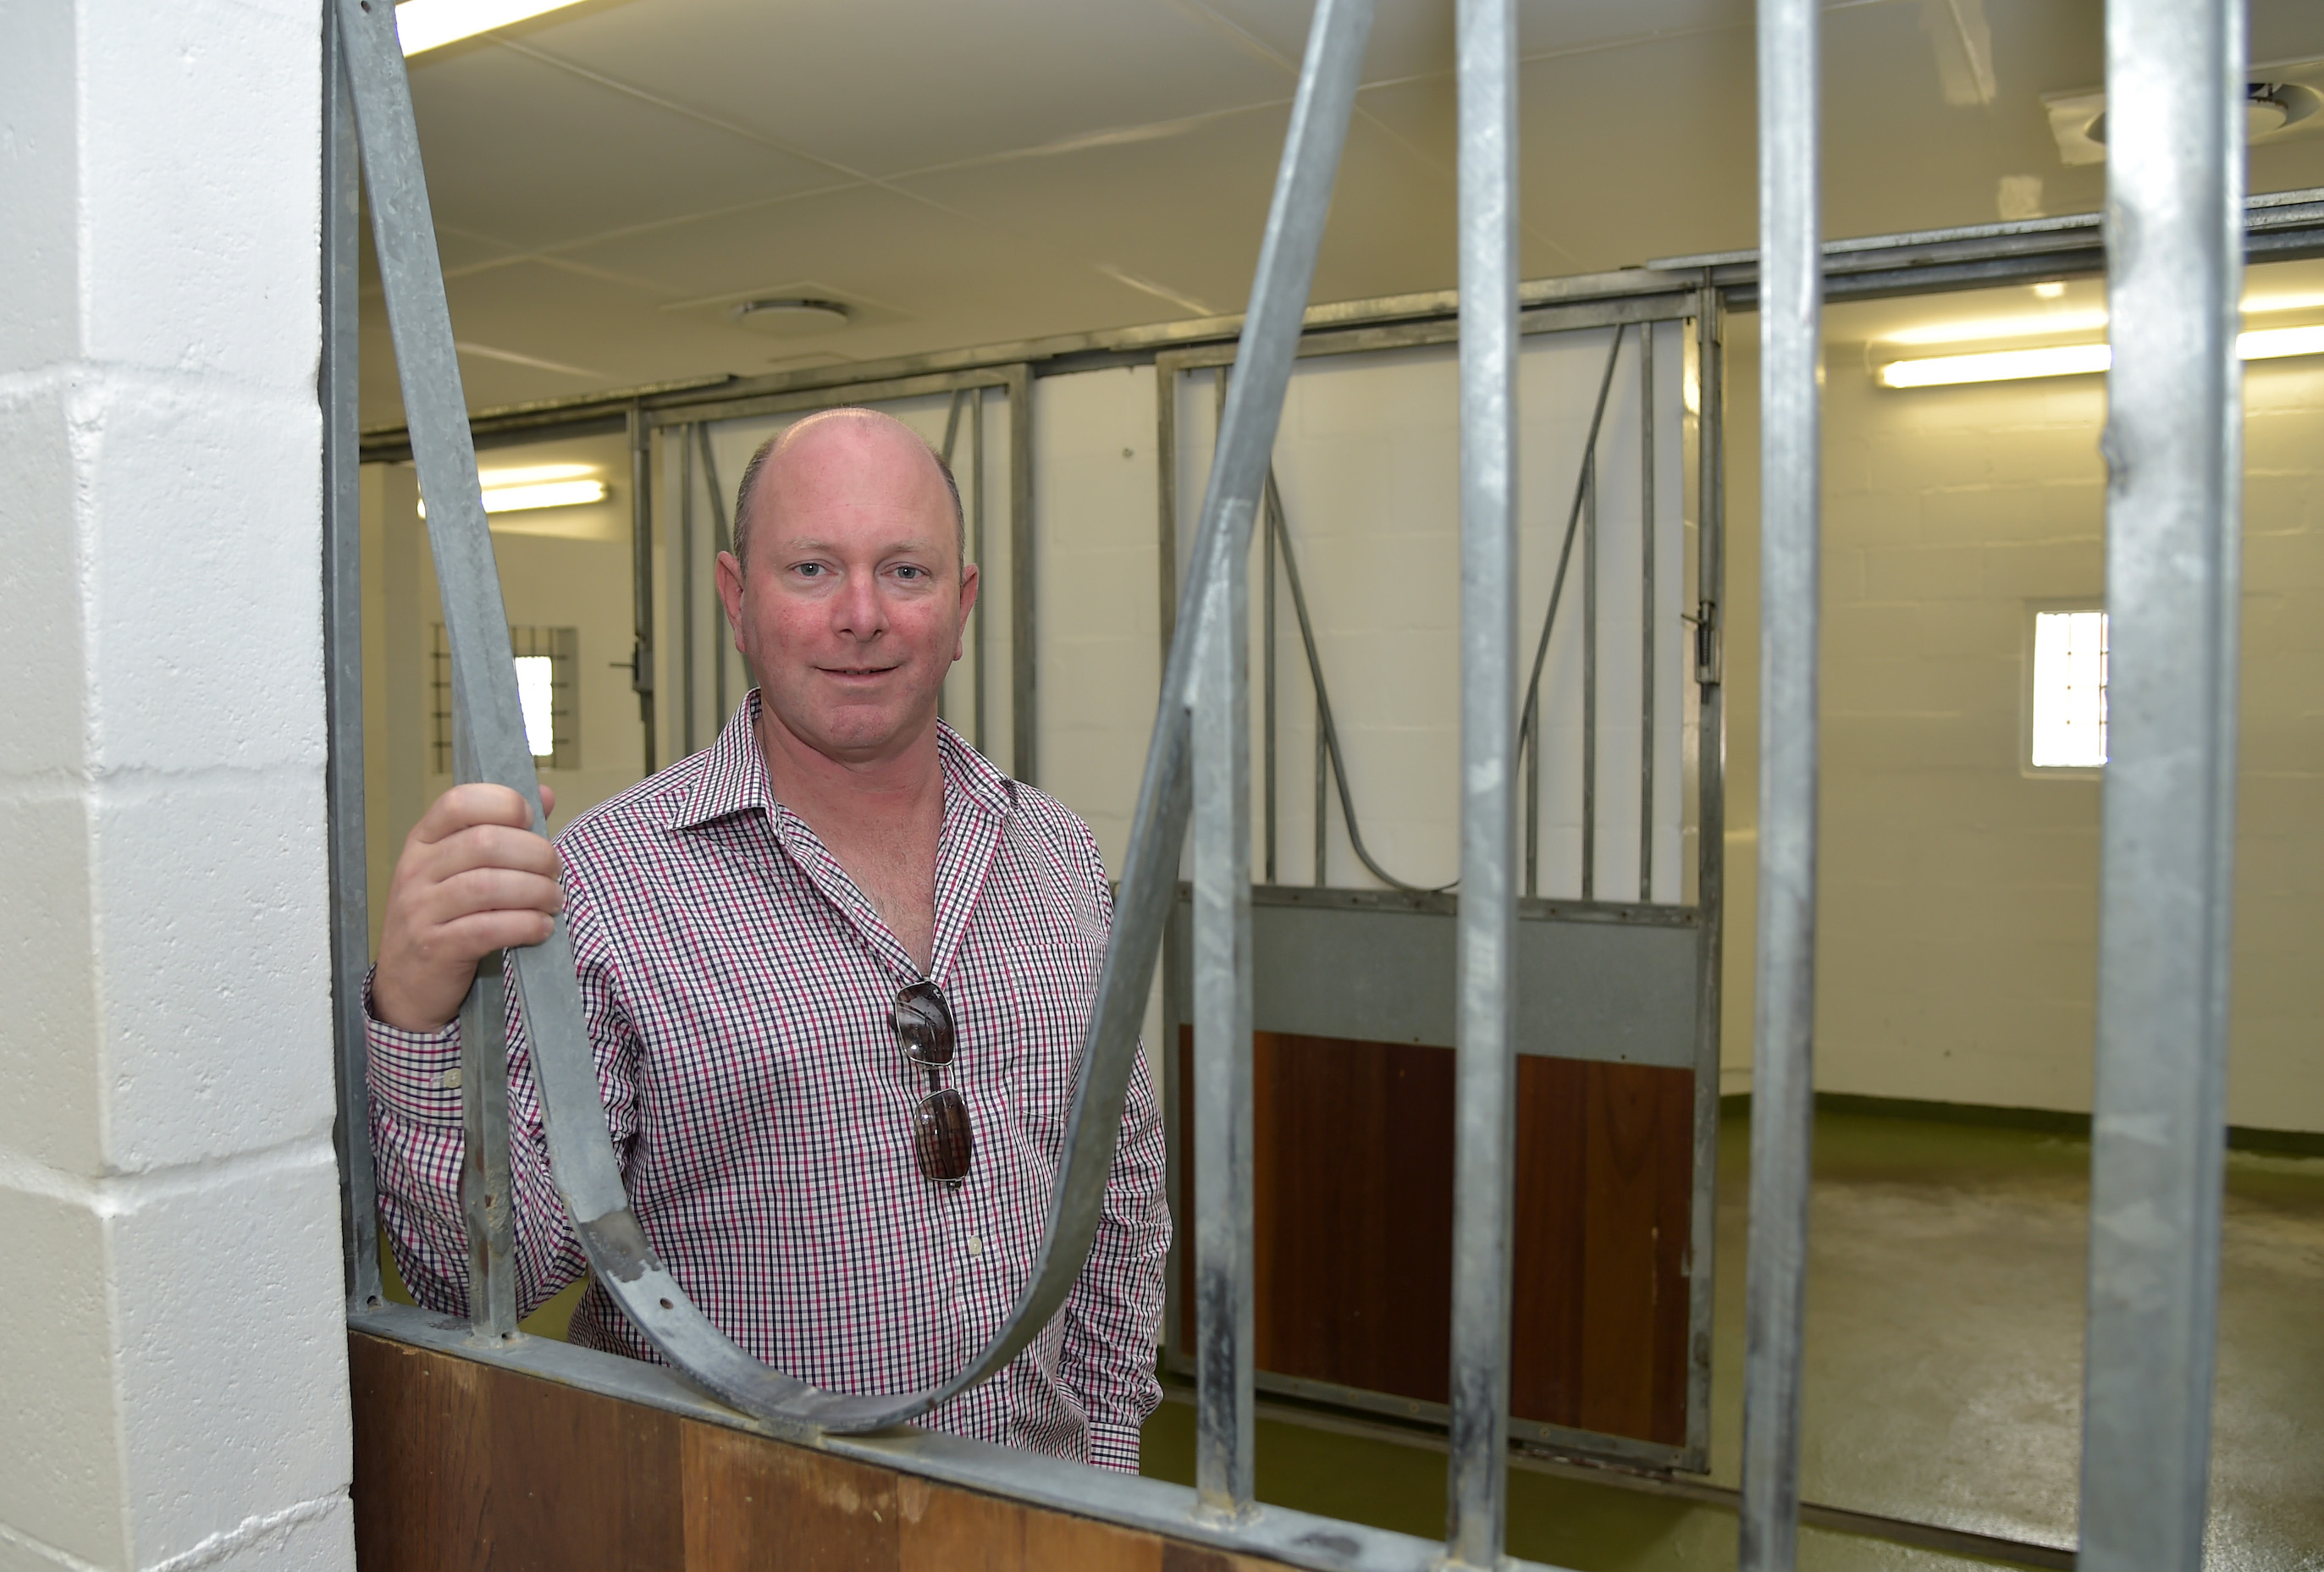 Task force leader Adrian Todd at the Cape Town facility where the quarantine process begins. “A lot of people overseas don’t seem to be aware that we already have protocols in place,” he says. “They think we’re starting from scratch, but that’s not the case.” Photo: Hugh Routledge